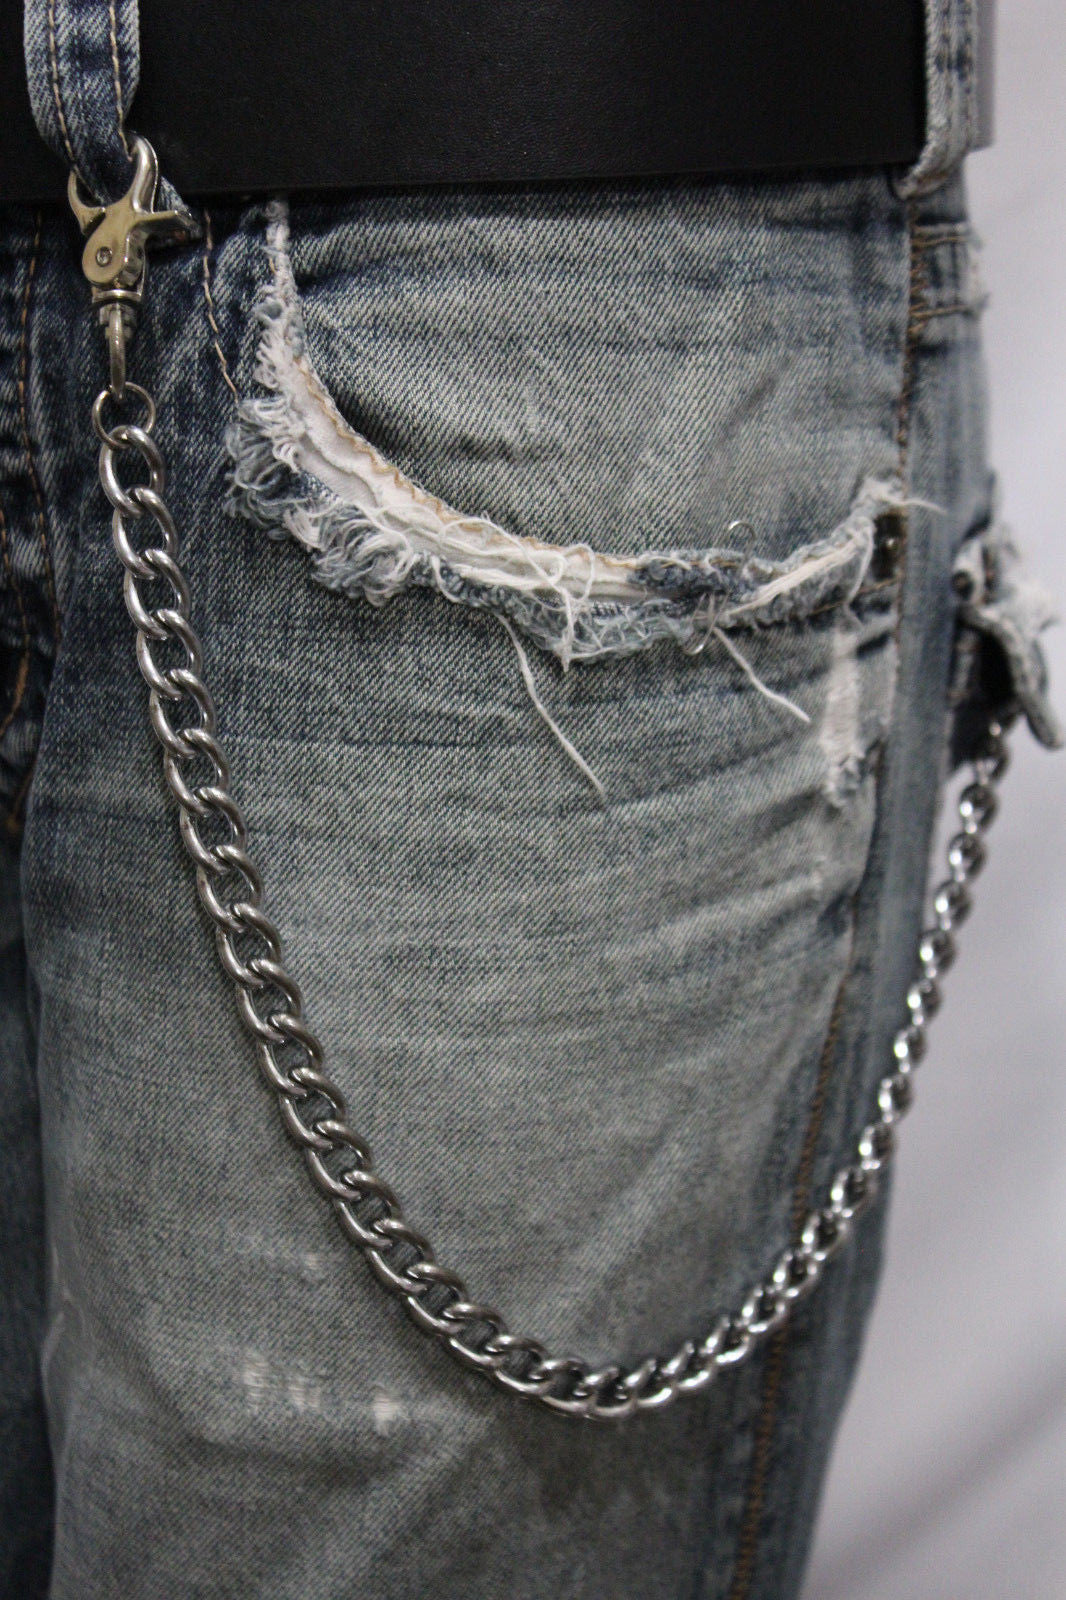 Silver Metal Wallet Chains Thick Link KeyChain Jeans Classic Biker Sty ...